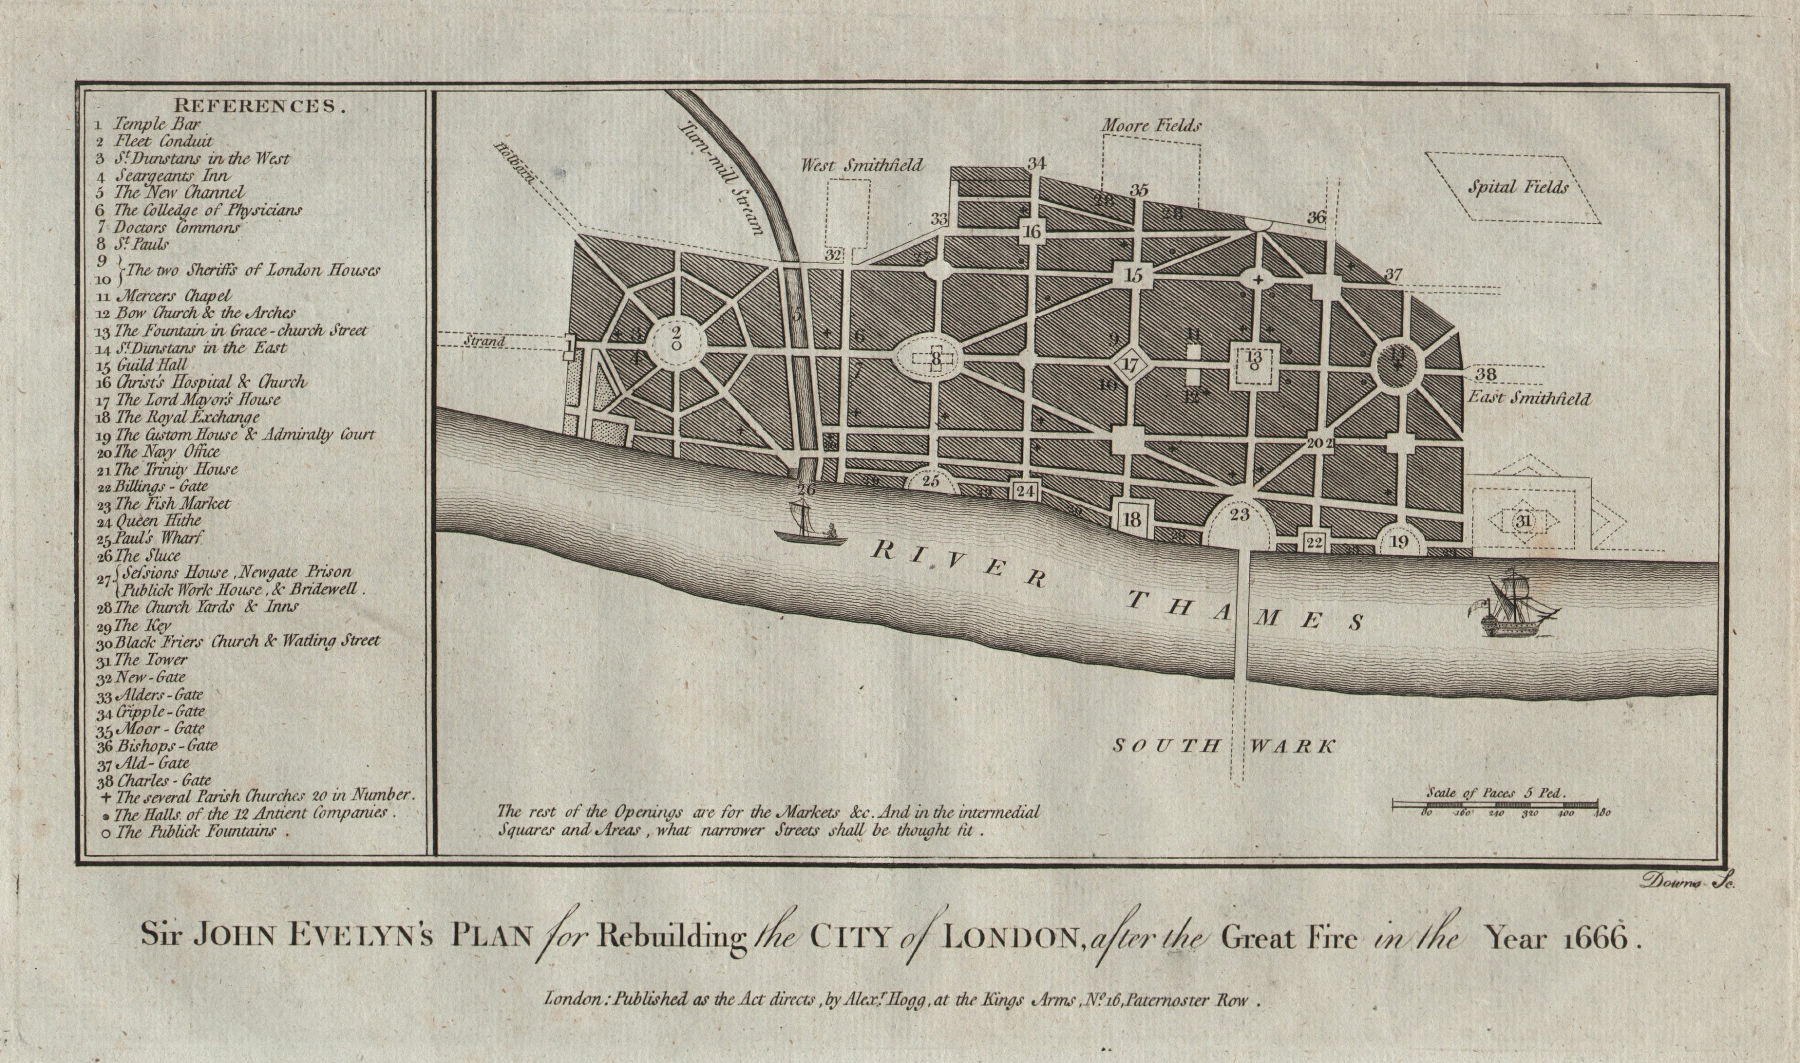 Associate Product Evelyn's City of London rebuilding plan after the 1666 fire. THORNTON 1784 map